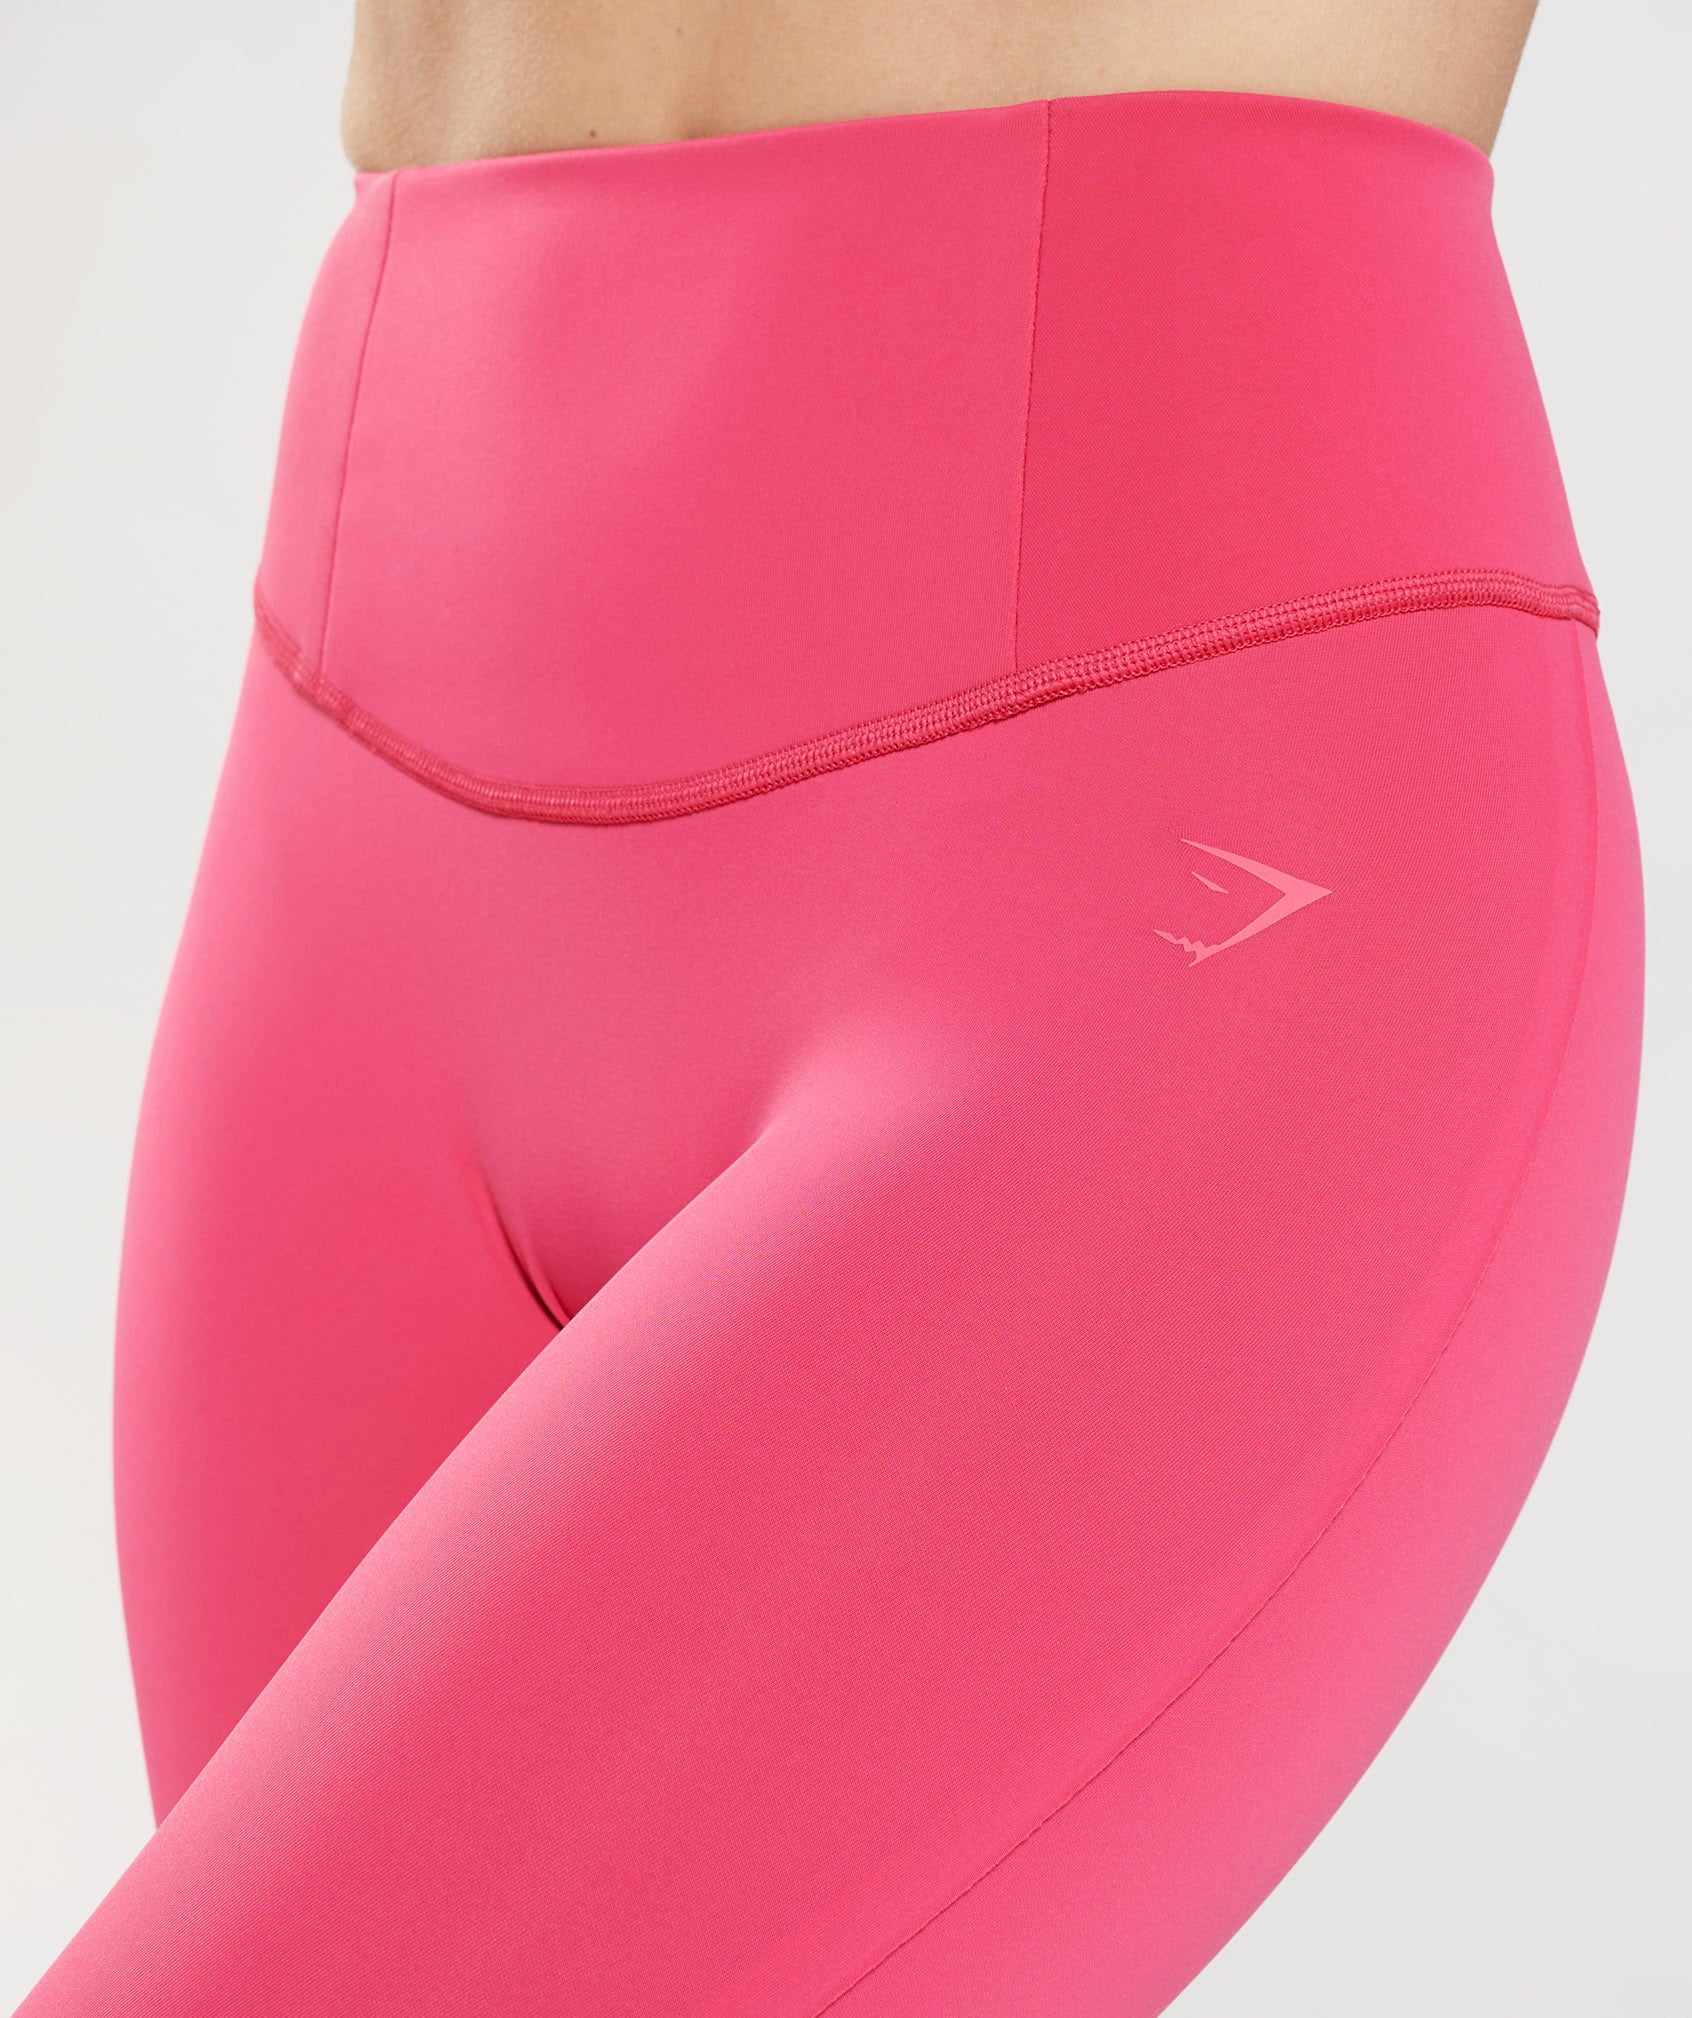 Gymshark Leggings Womens Small Pink Coral Flex Activewear Workout Gym - $29  - From Kristen